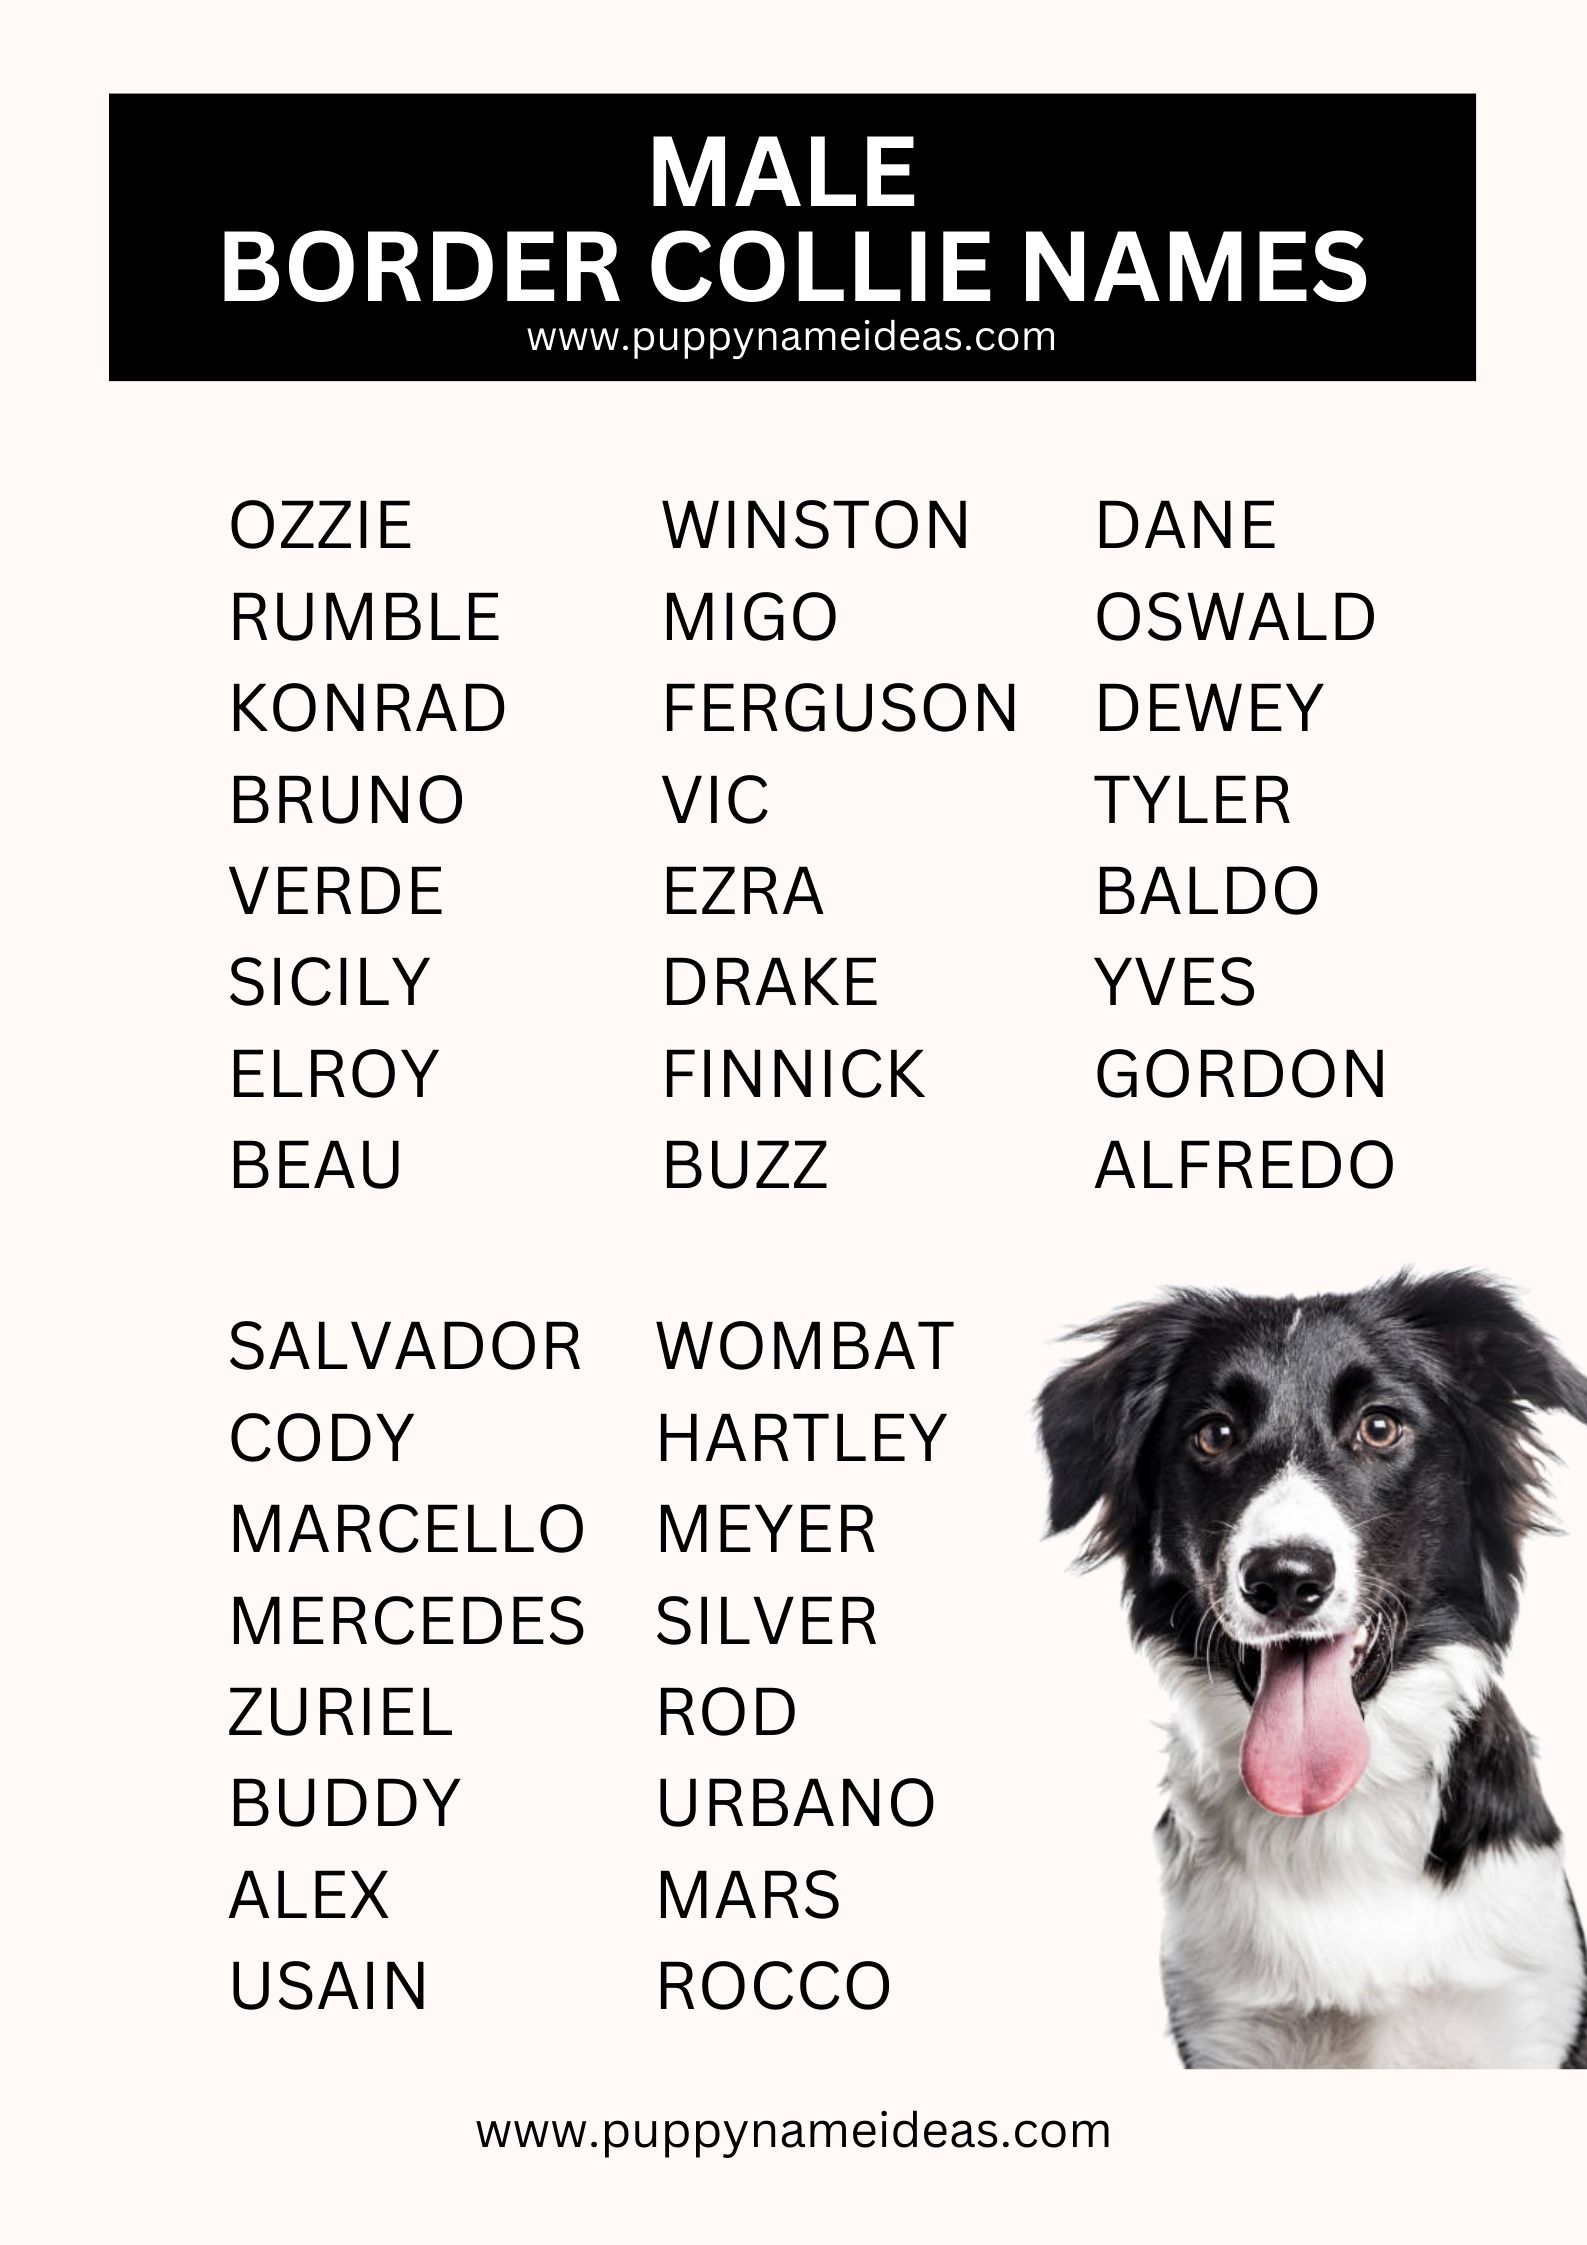 List Of Male Border Collie Names